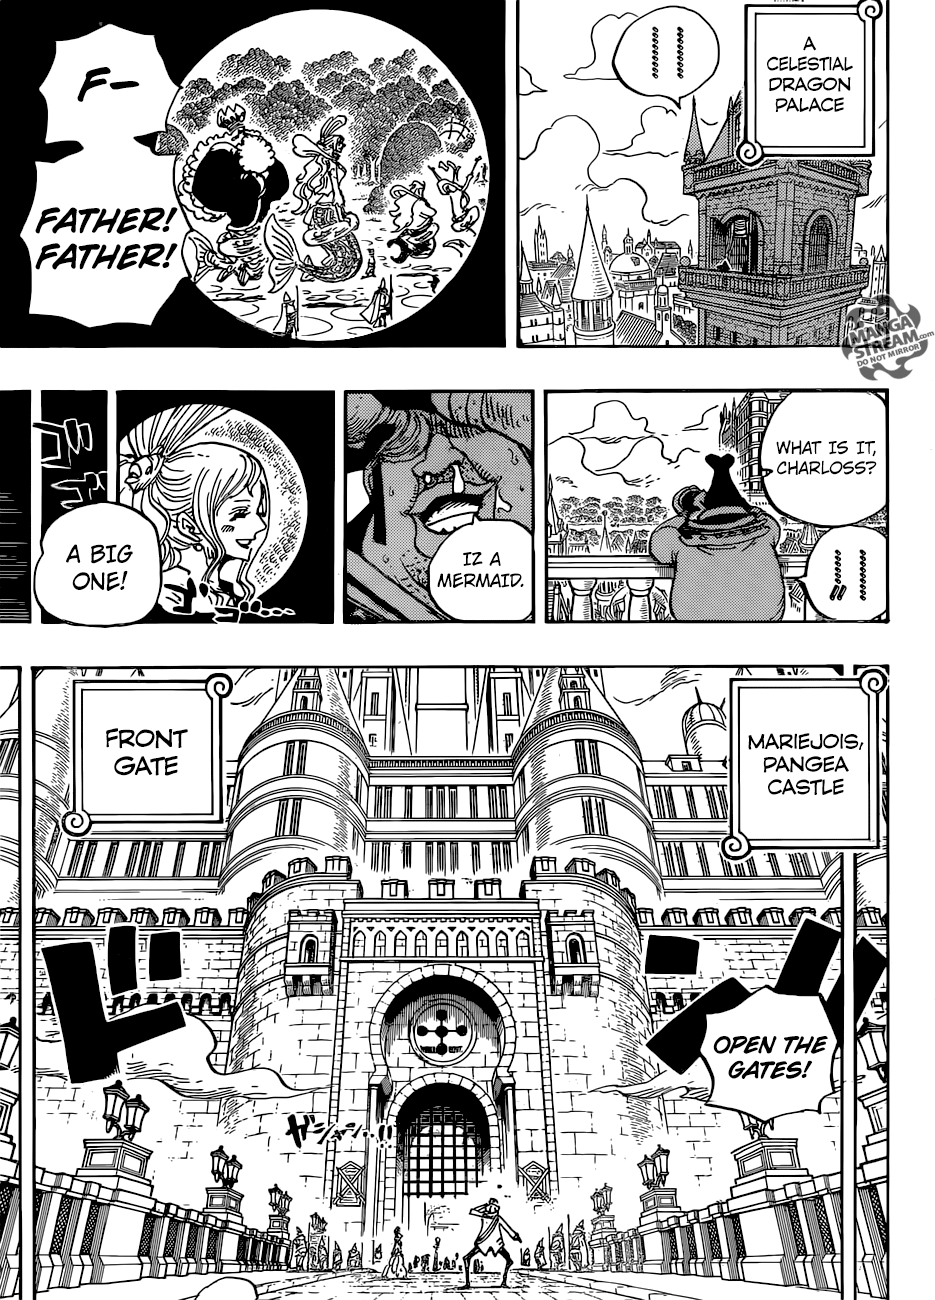 One Piece, Chapter 906 - The Holy Land Mary Geoise image 06